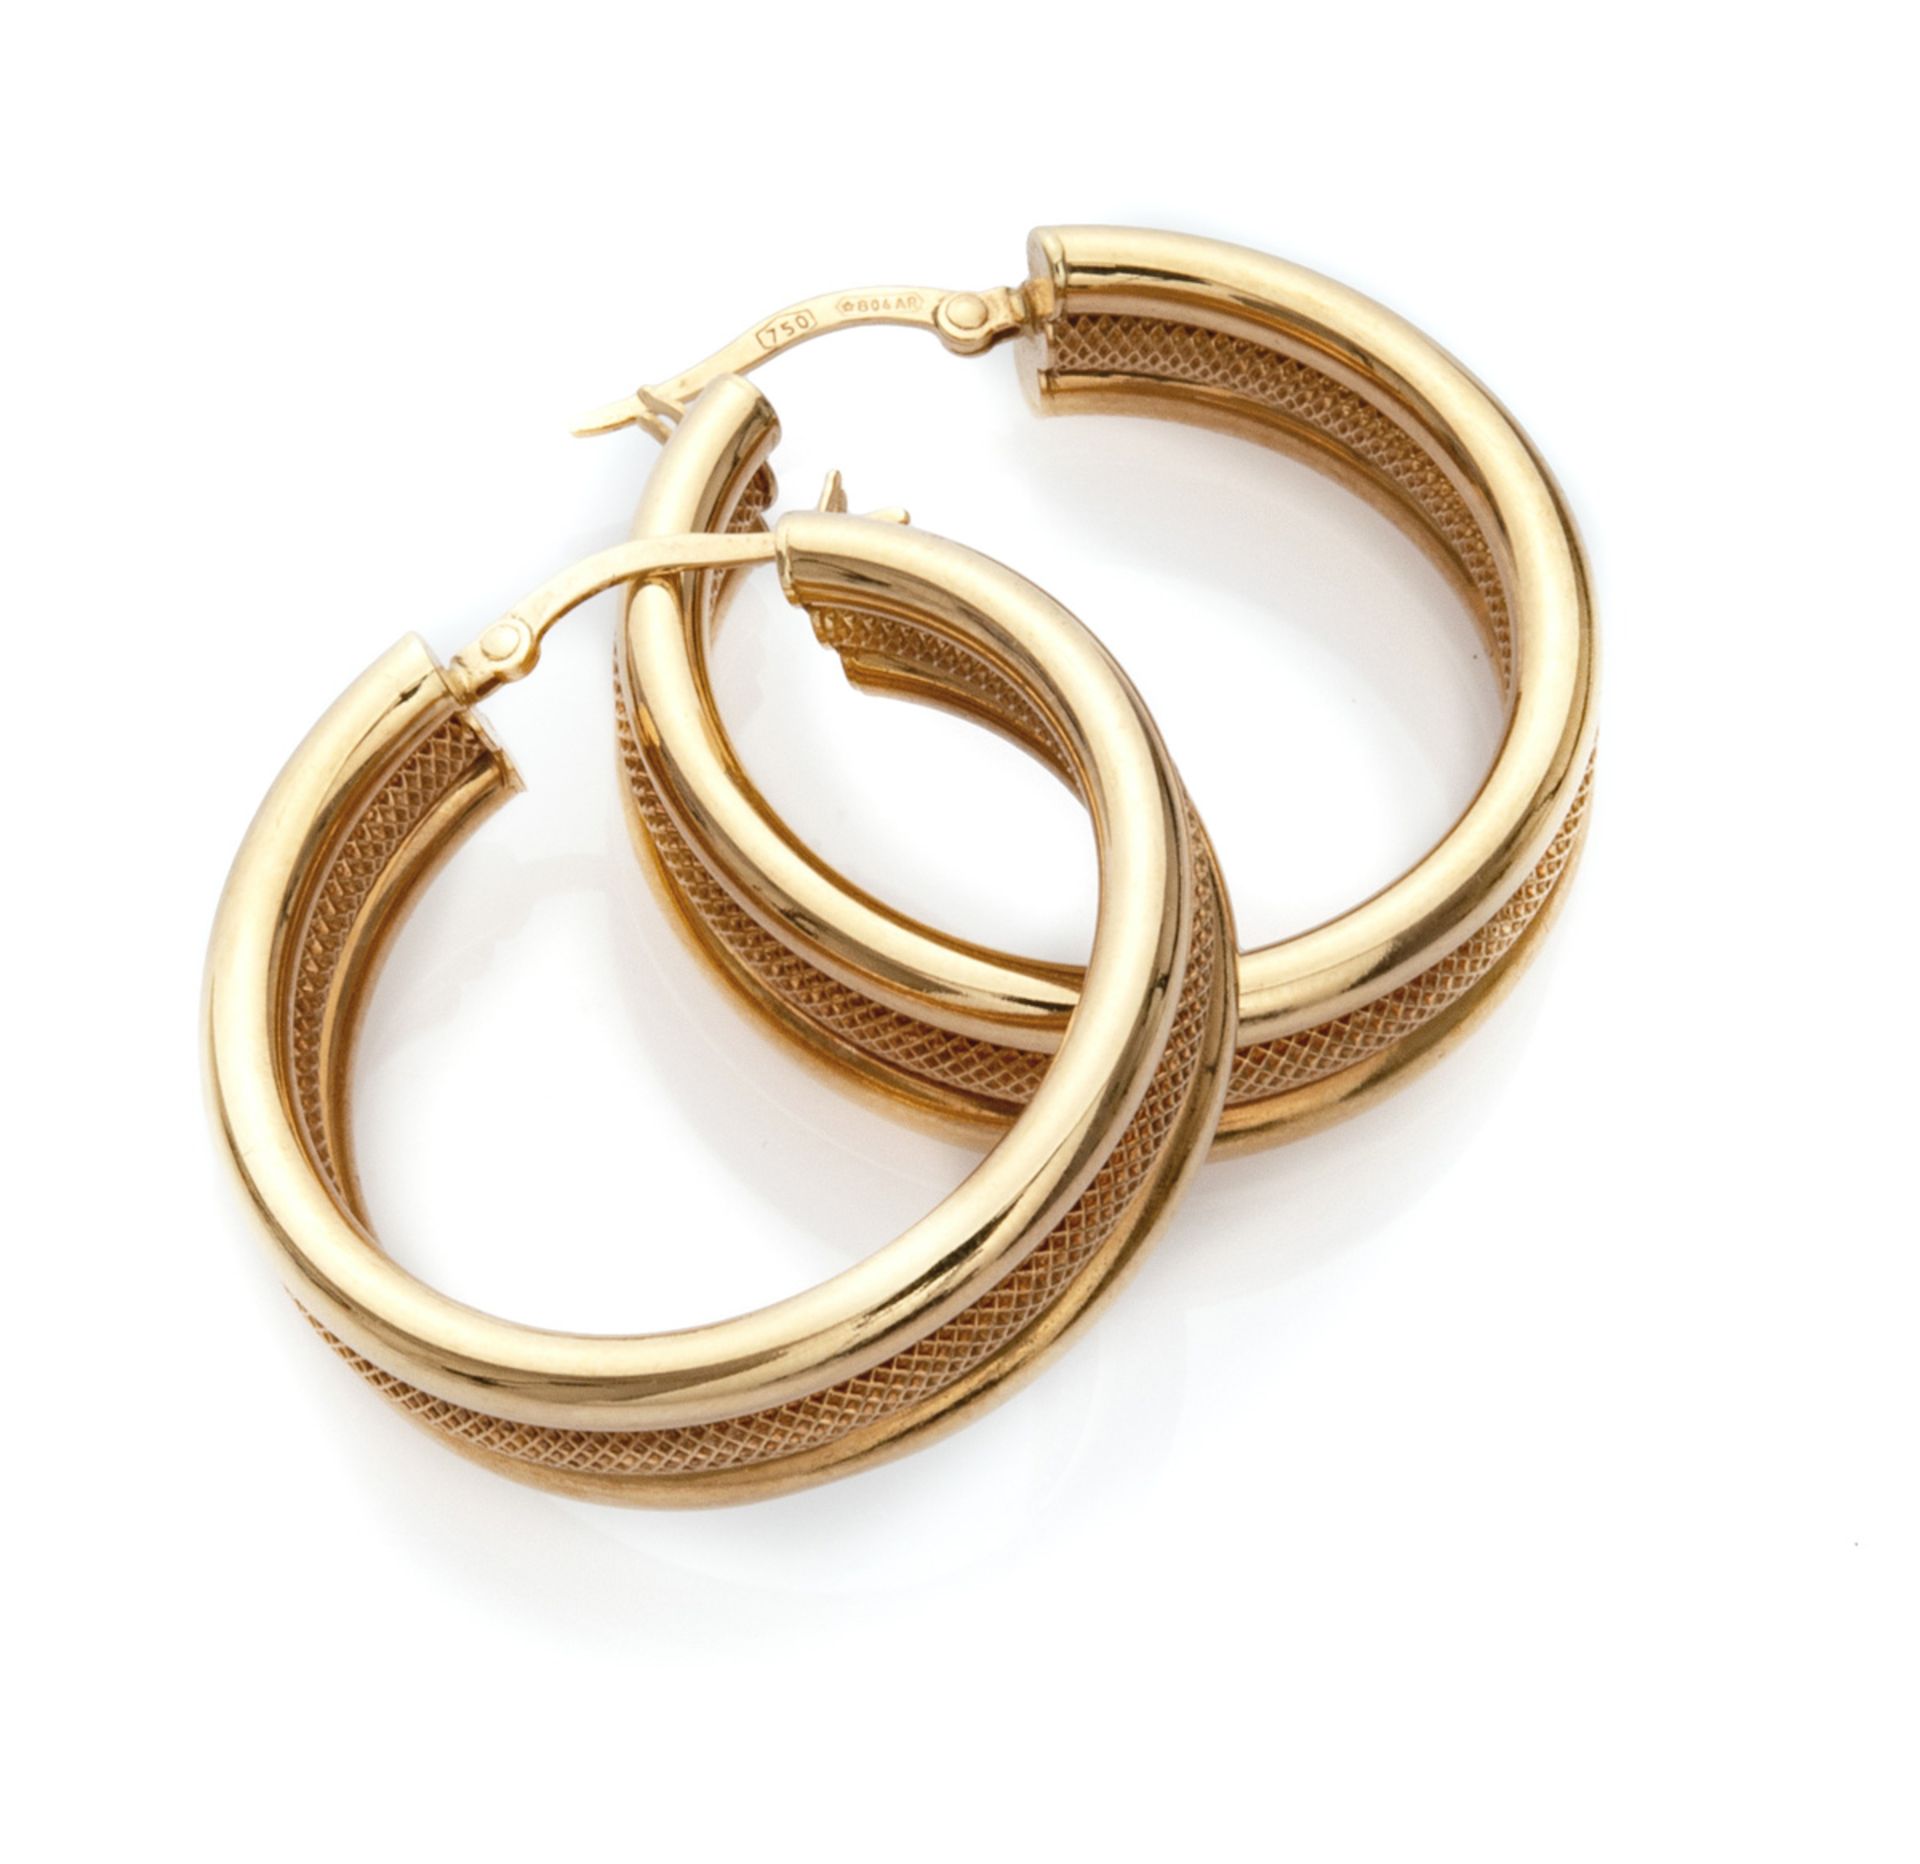 PAIR OF EARRINGS in yellow gold 18 kts., smooth and grained bands. Diameter cm. 3, total weight